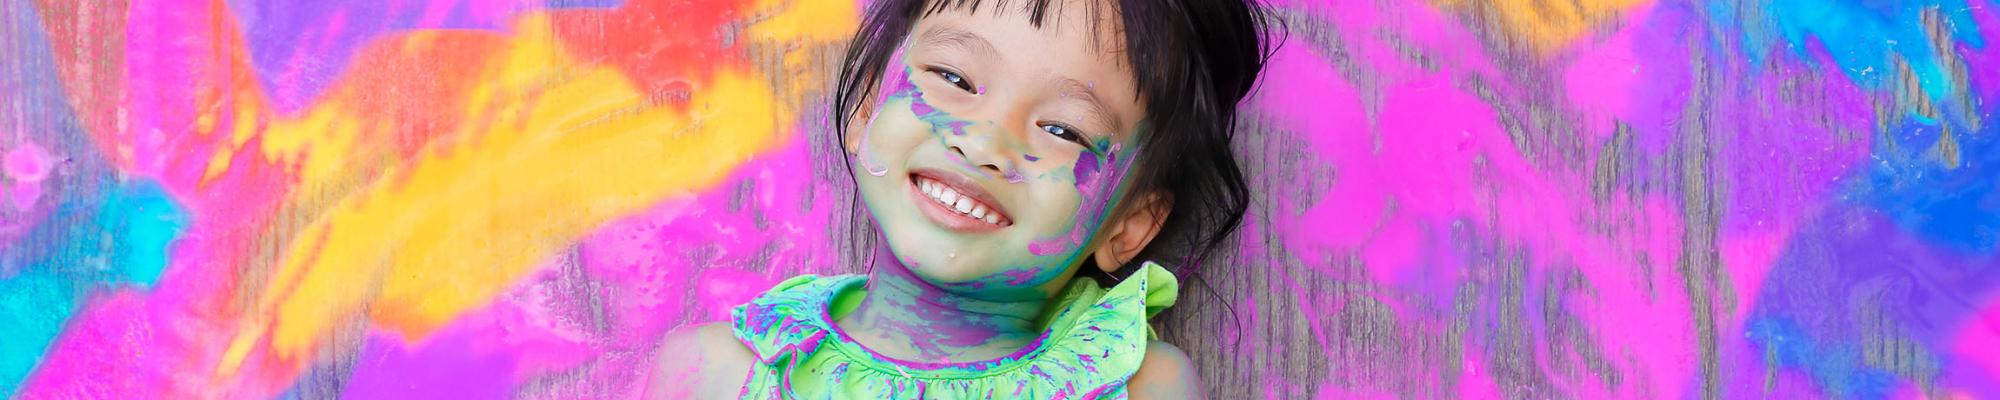 Kid covered in paint and smiling